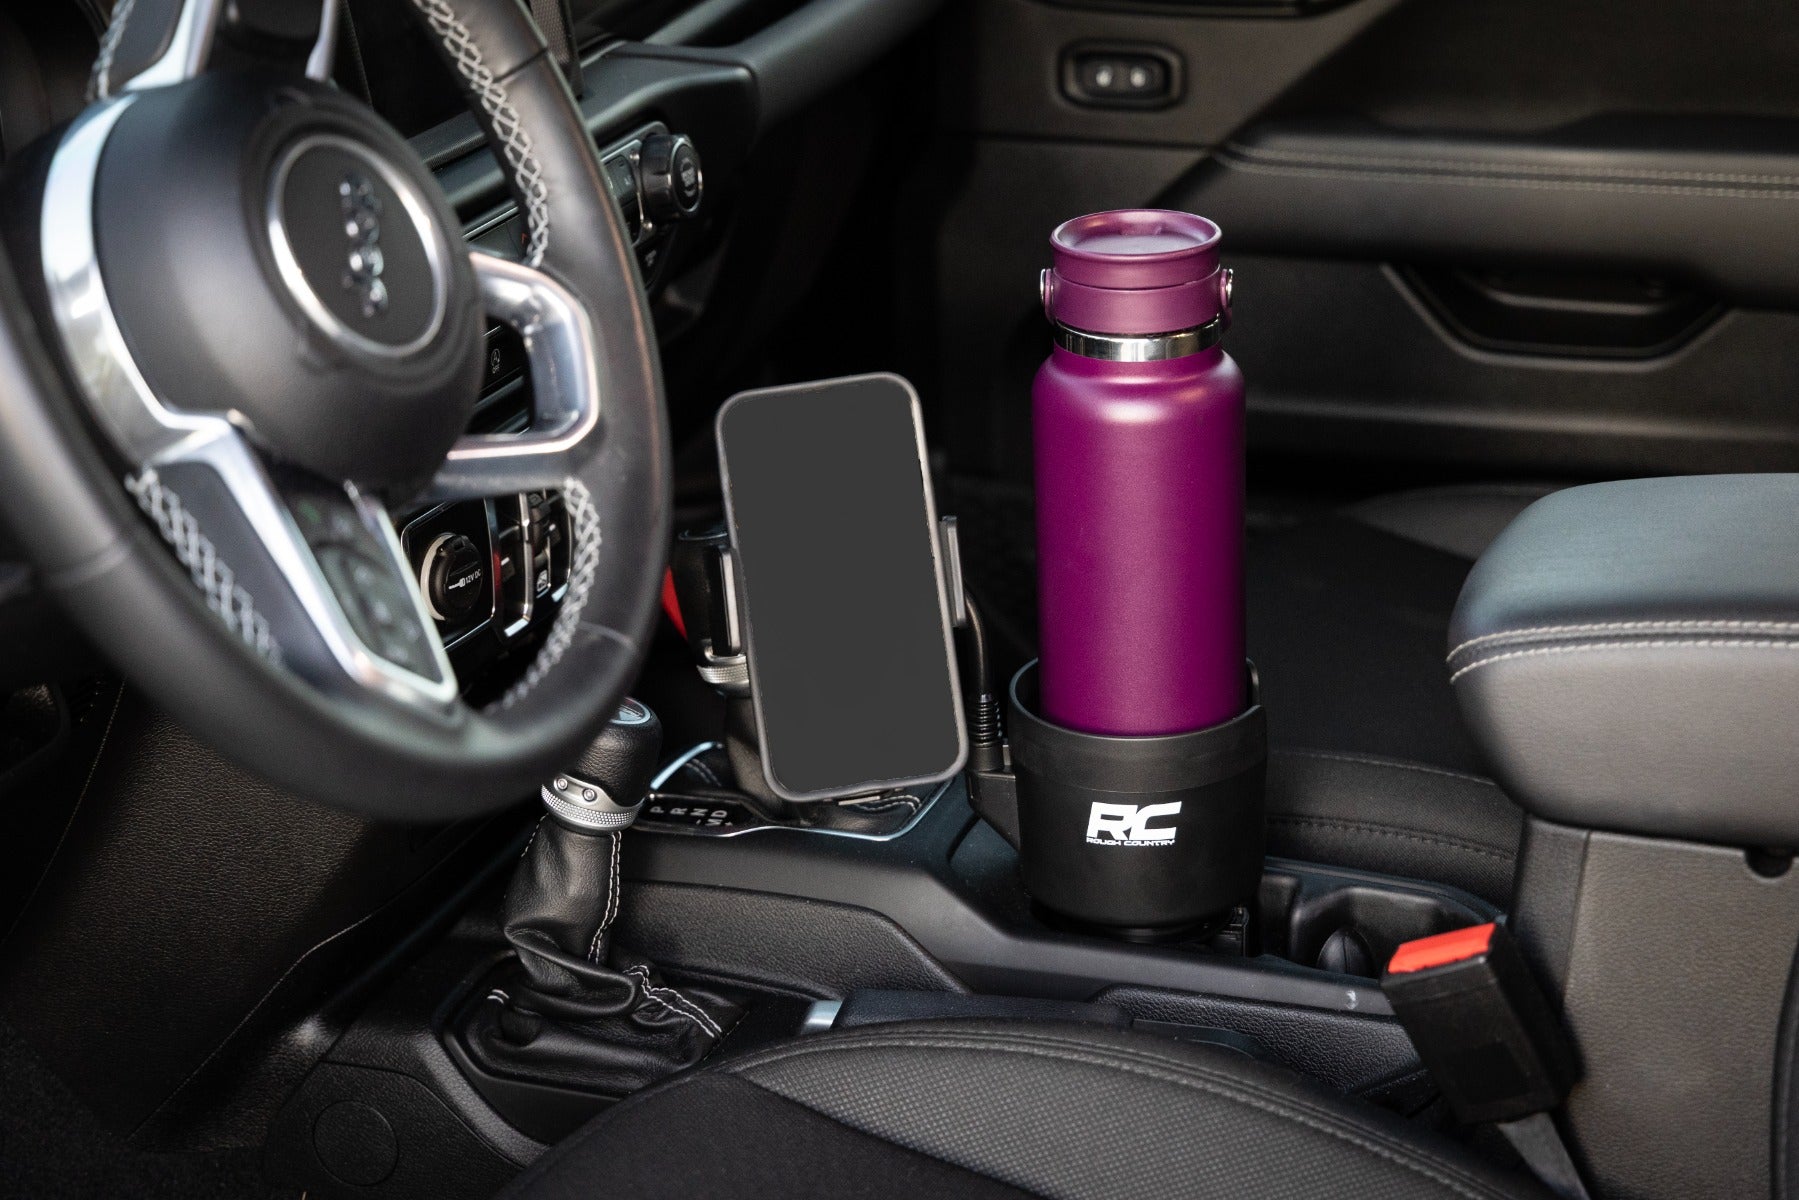 2 in 1 Expanding Cup Holder and Phone Holder